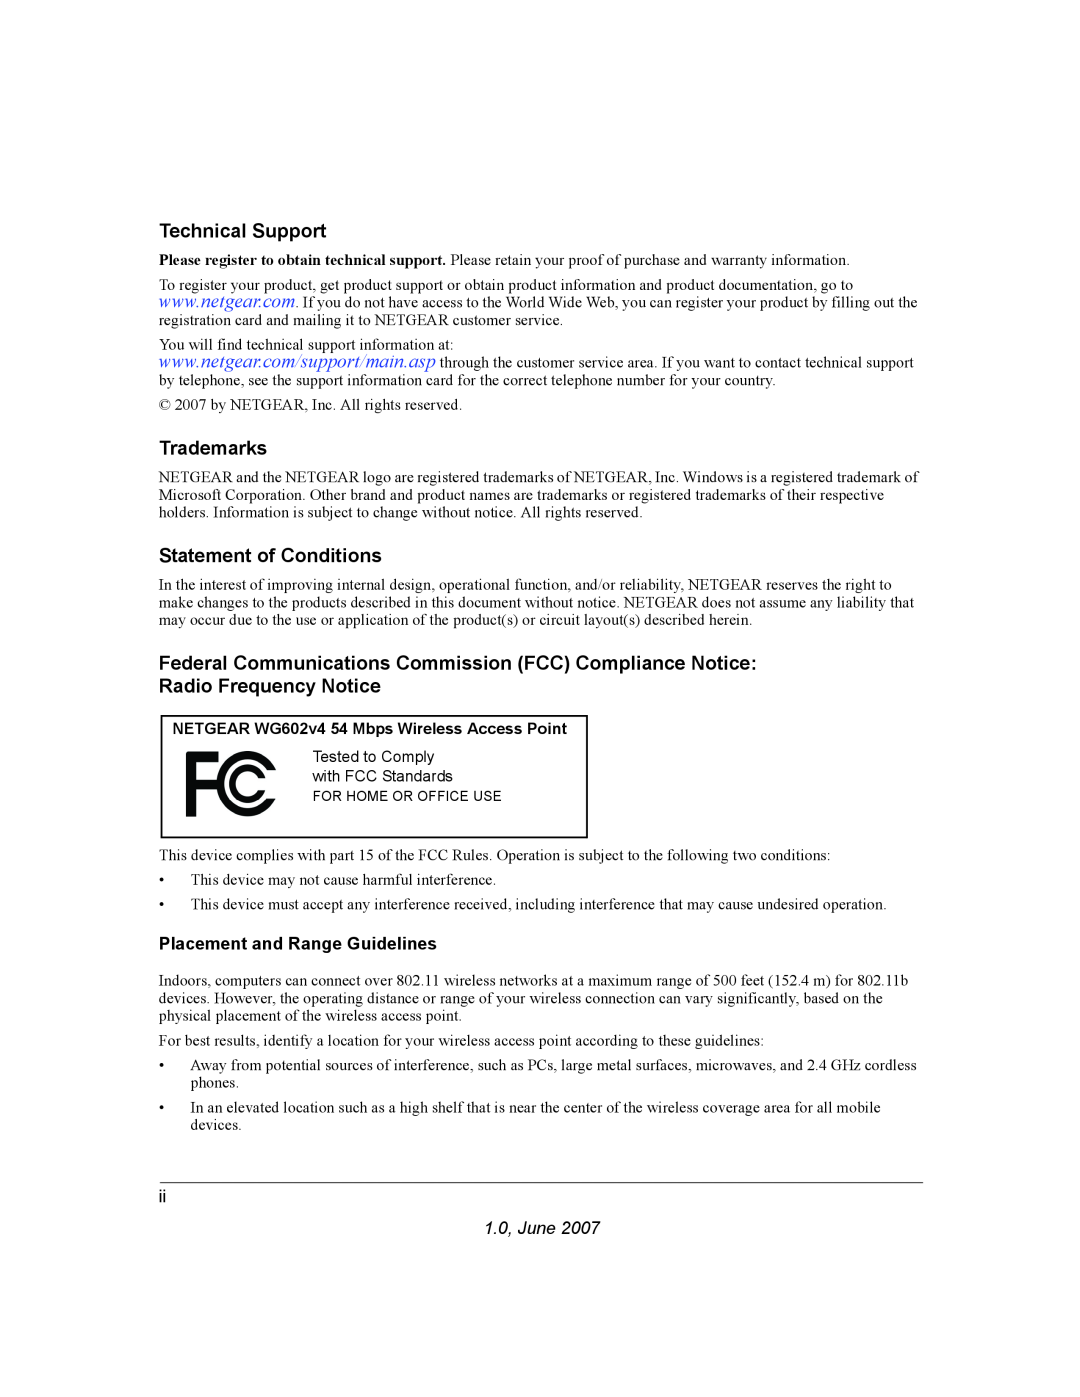 NETGEAR WG602V4 manual Technical Support, Trademarks, Statement of Conditions, Placement and Range Guidelines, 1.0, June 